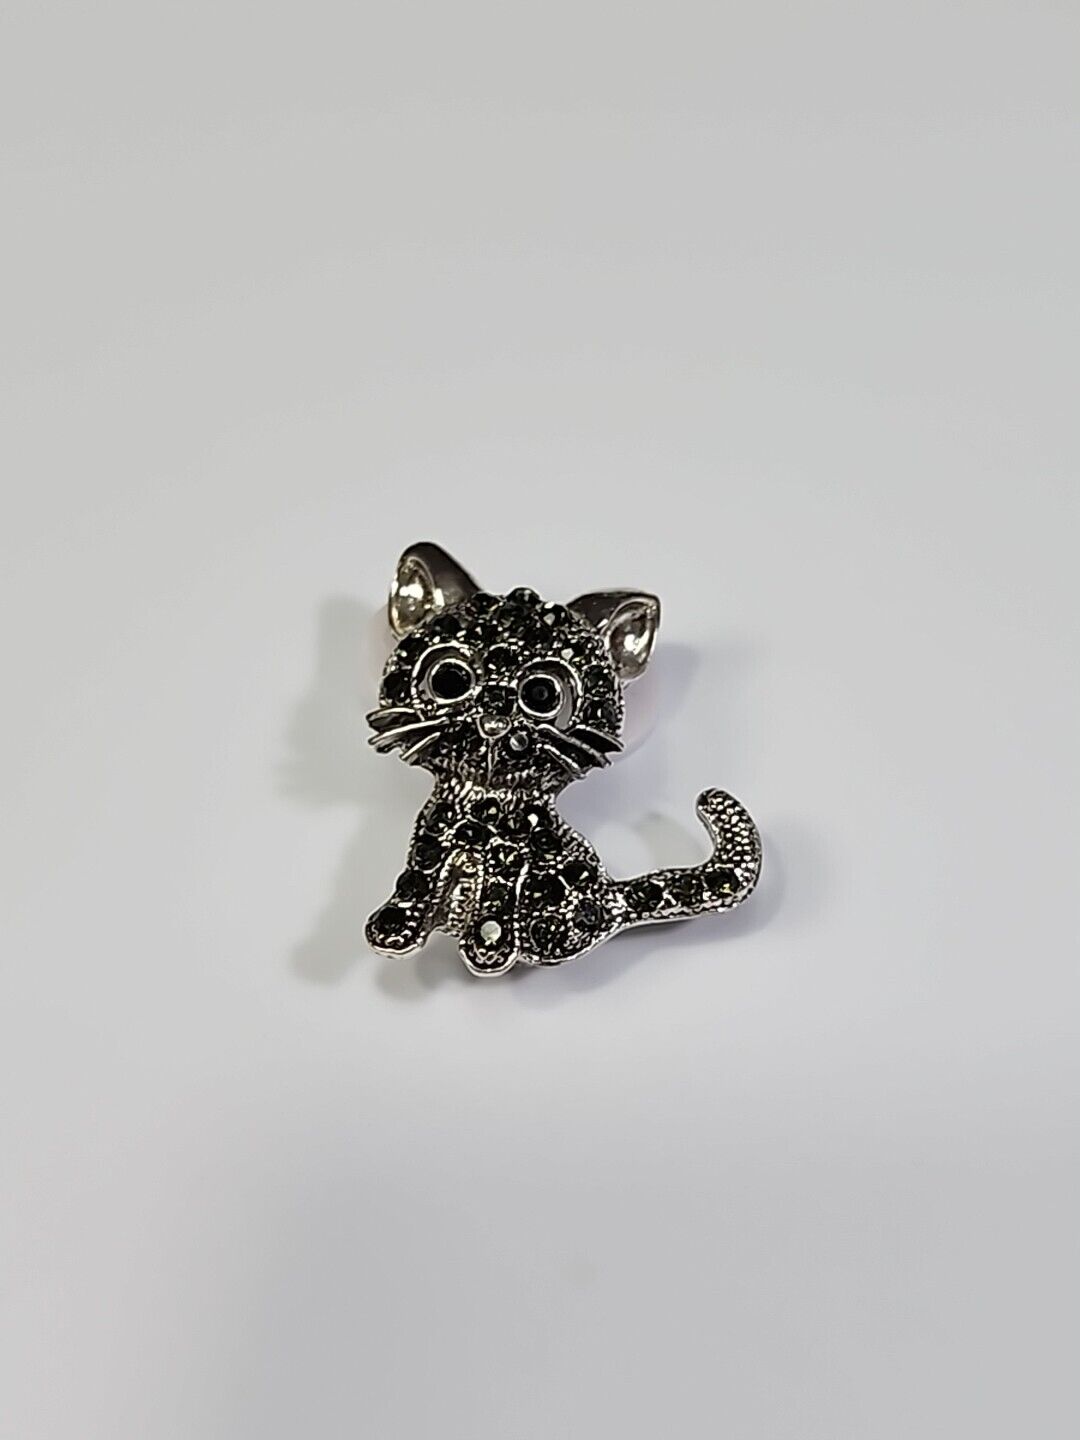 Cat Brooch Pin Silver Color with Black Faceted Faux Gems Kitty Kitten Feline